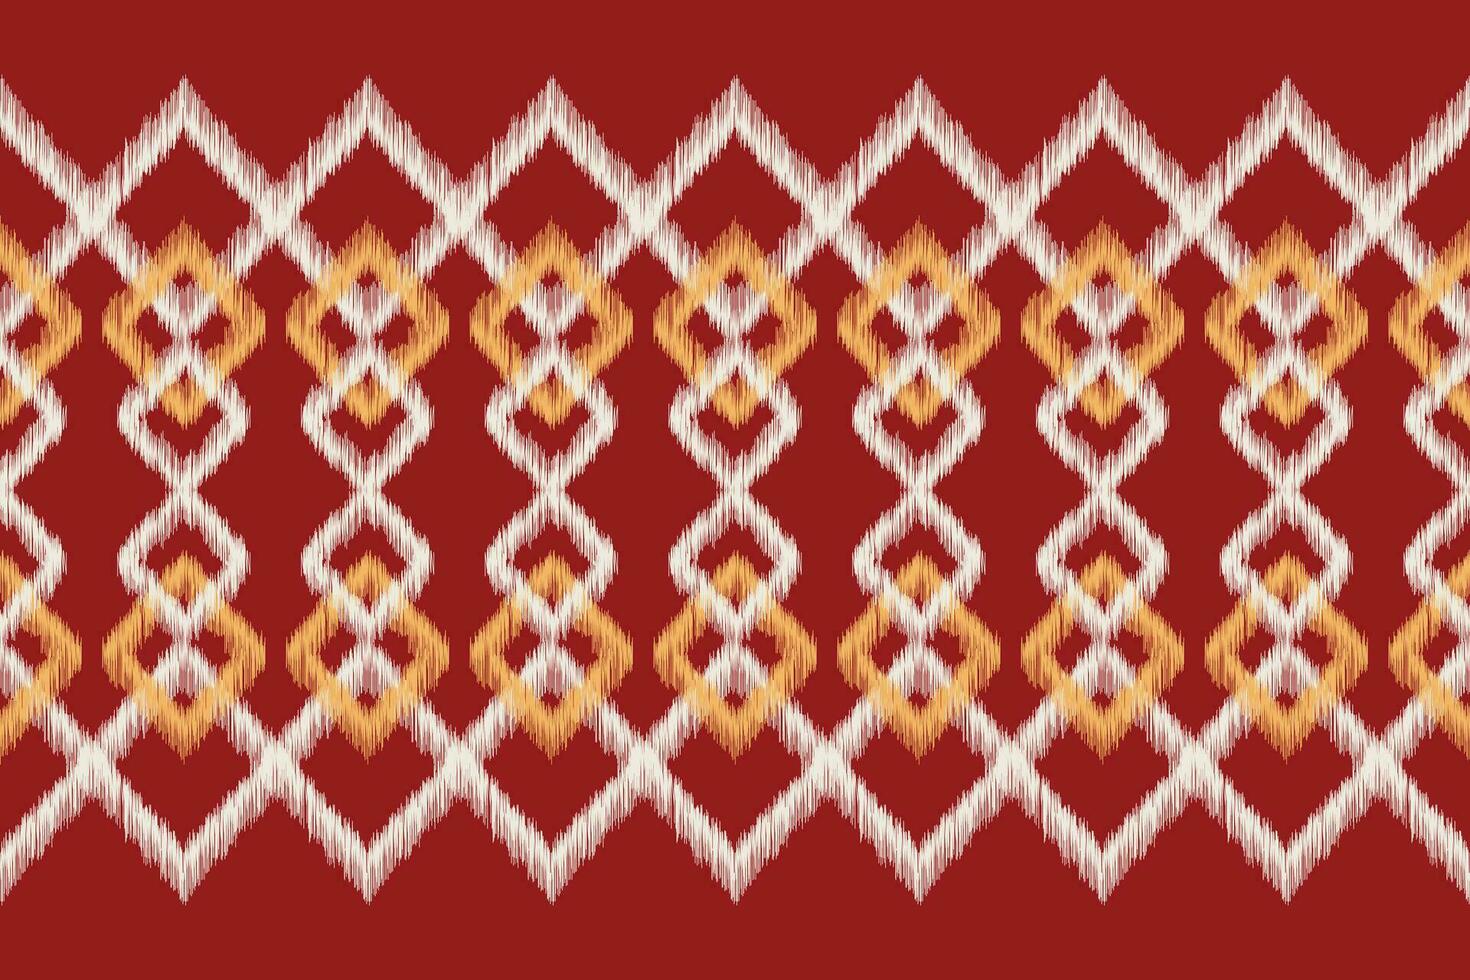 Ethnic Ikat fabric pattern geometric style.African Ikat embroidery Ethnic oriental pattern red background. Abstract,vector,illustration.Texture,clothing,frame,decoration,carpet,motif. vector